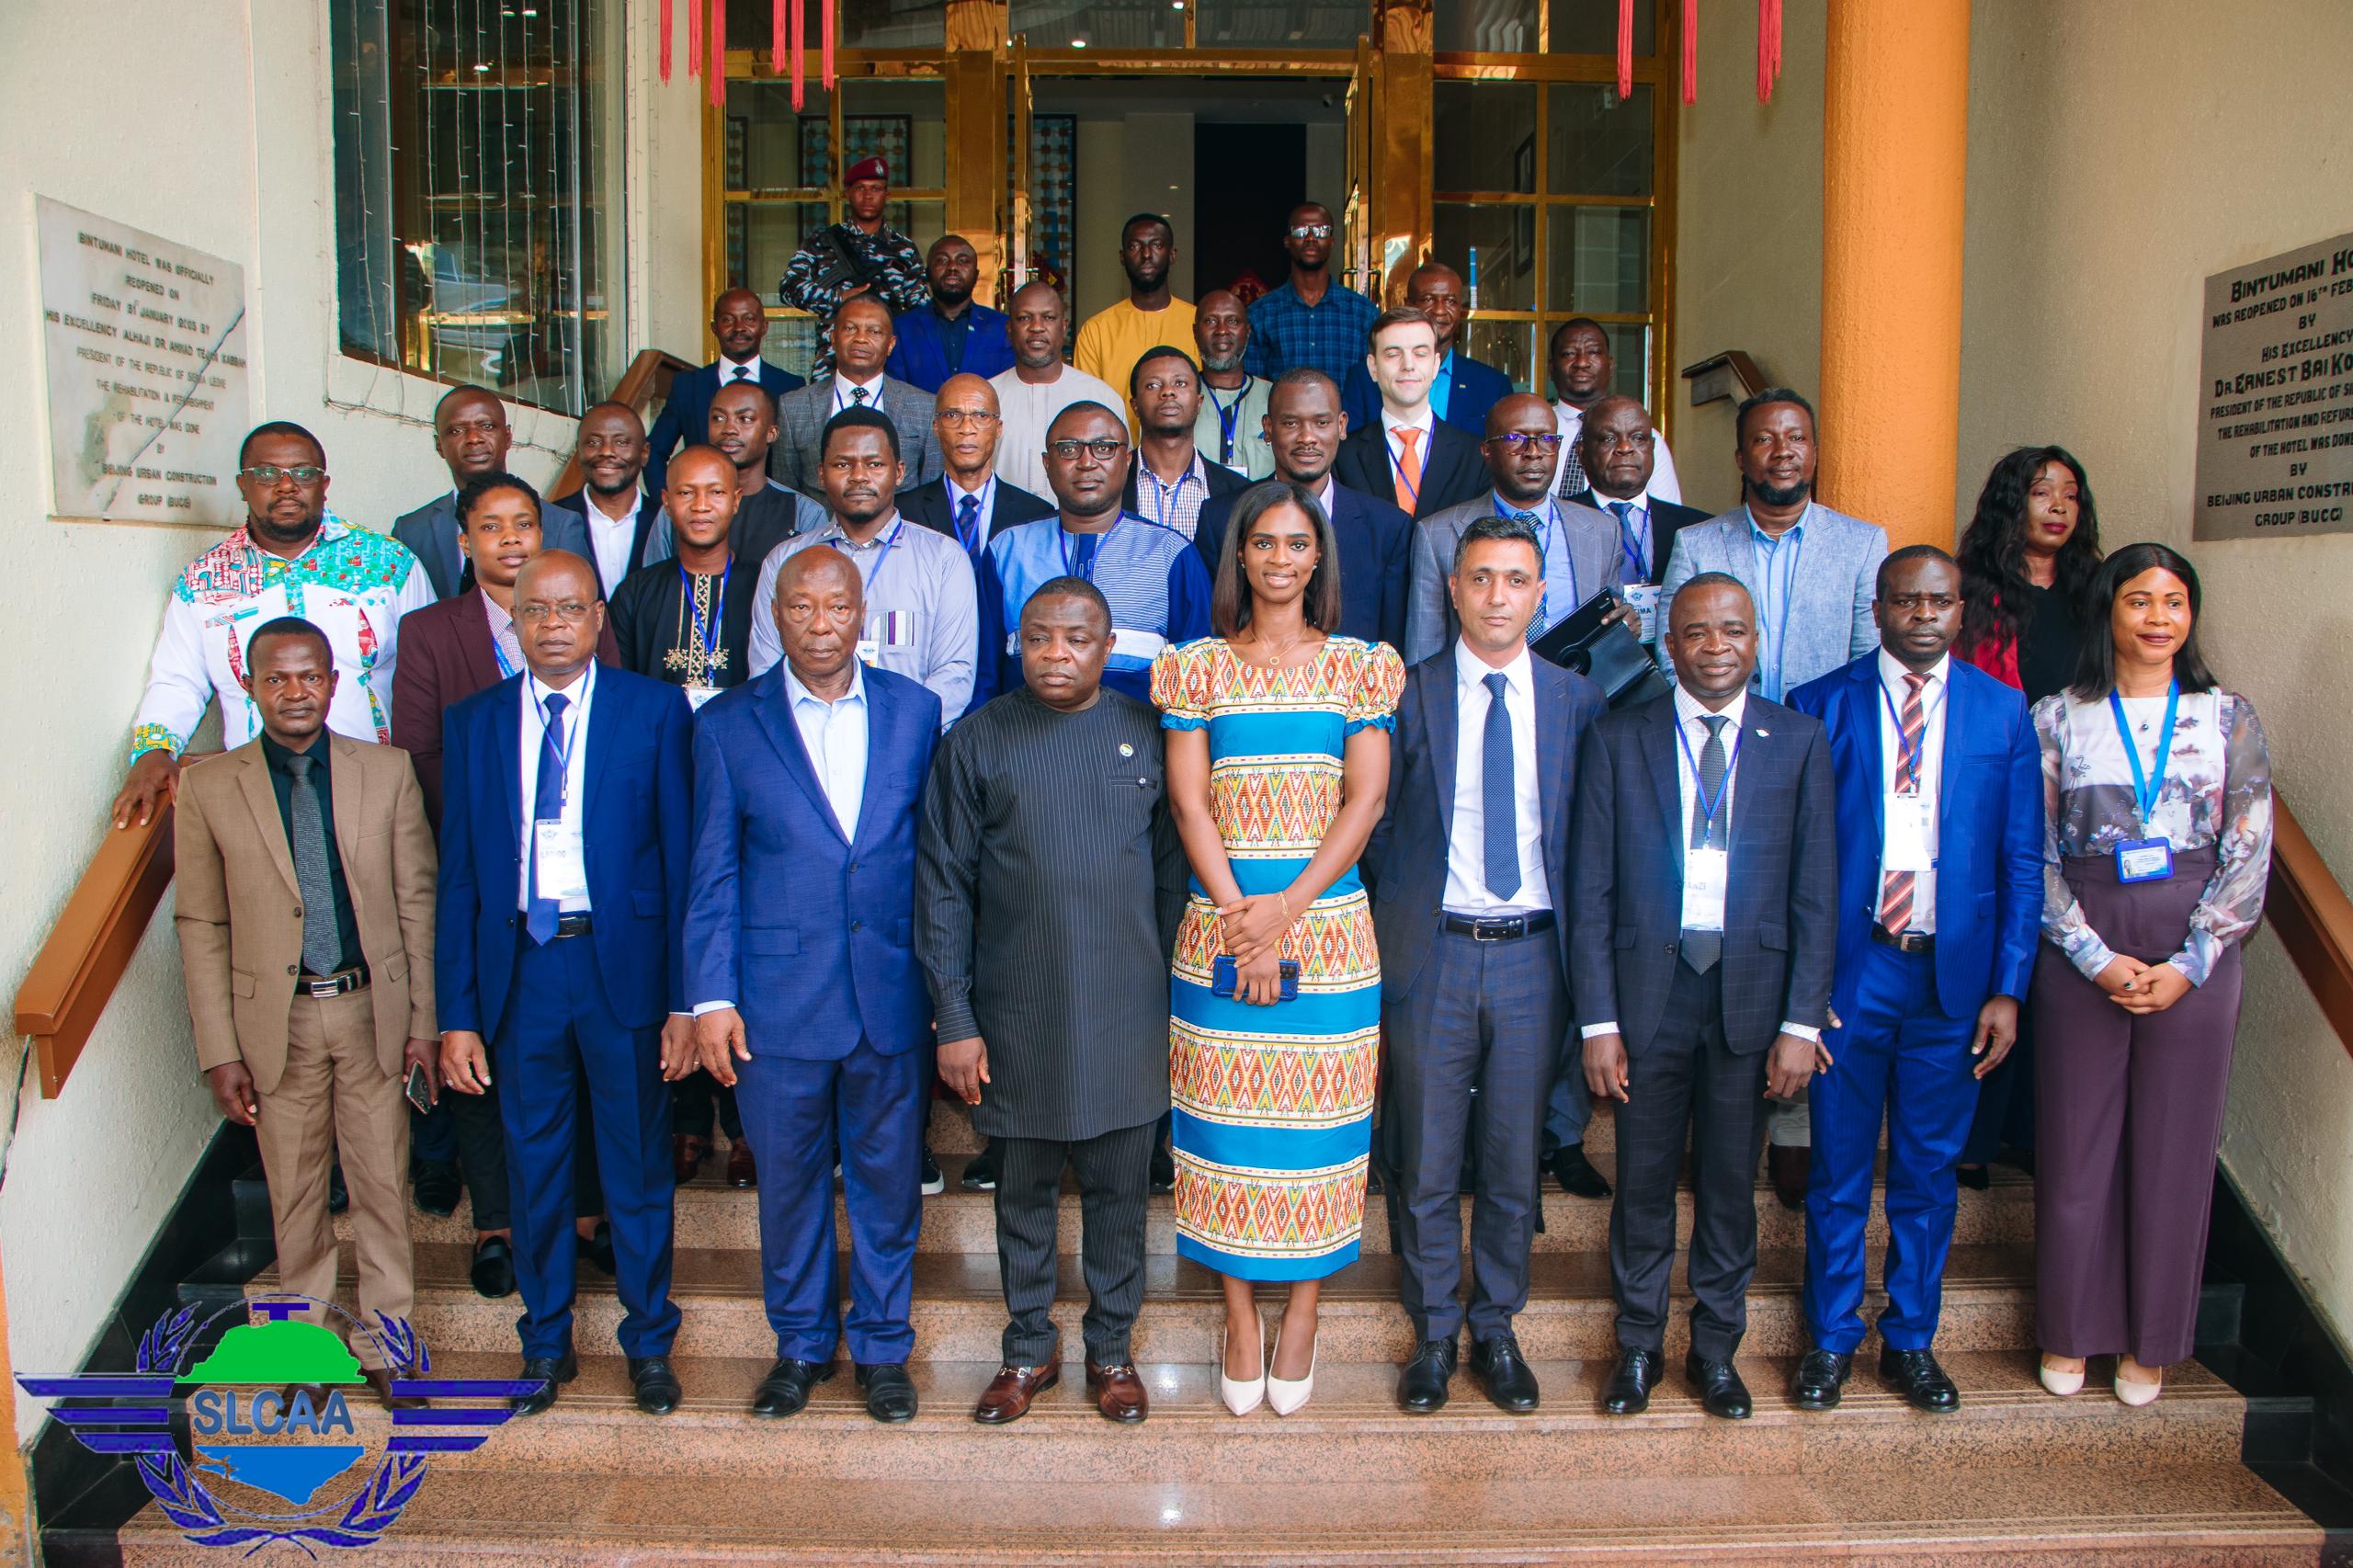 SIERRA LEONE’S CIVIL AVIATION AUTHORITY HOSTS 4th CODEVMET-AFI PROJECT STEERING COMMITTEE MEETING AT THE BINTUMANI CONFERENCE HALL, FREETOWN, SIERRA LEONE.